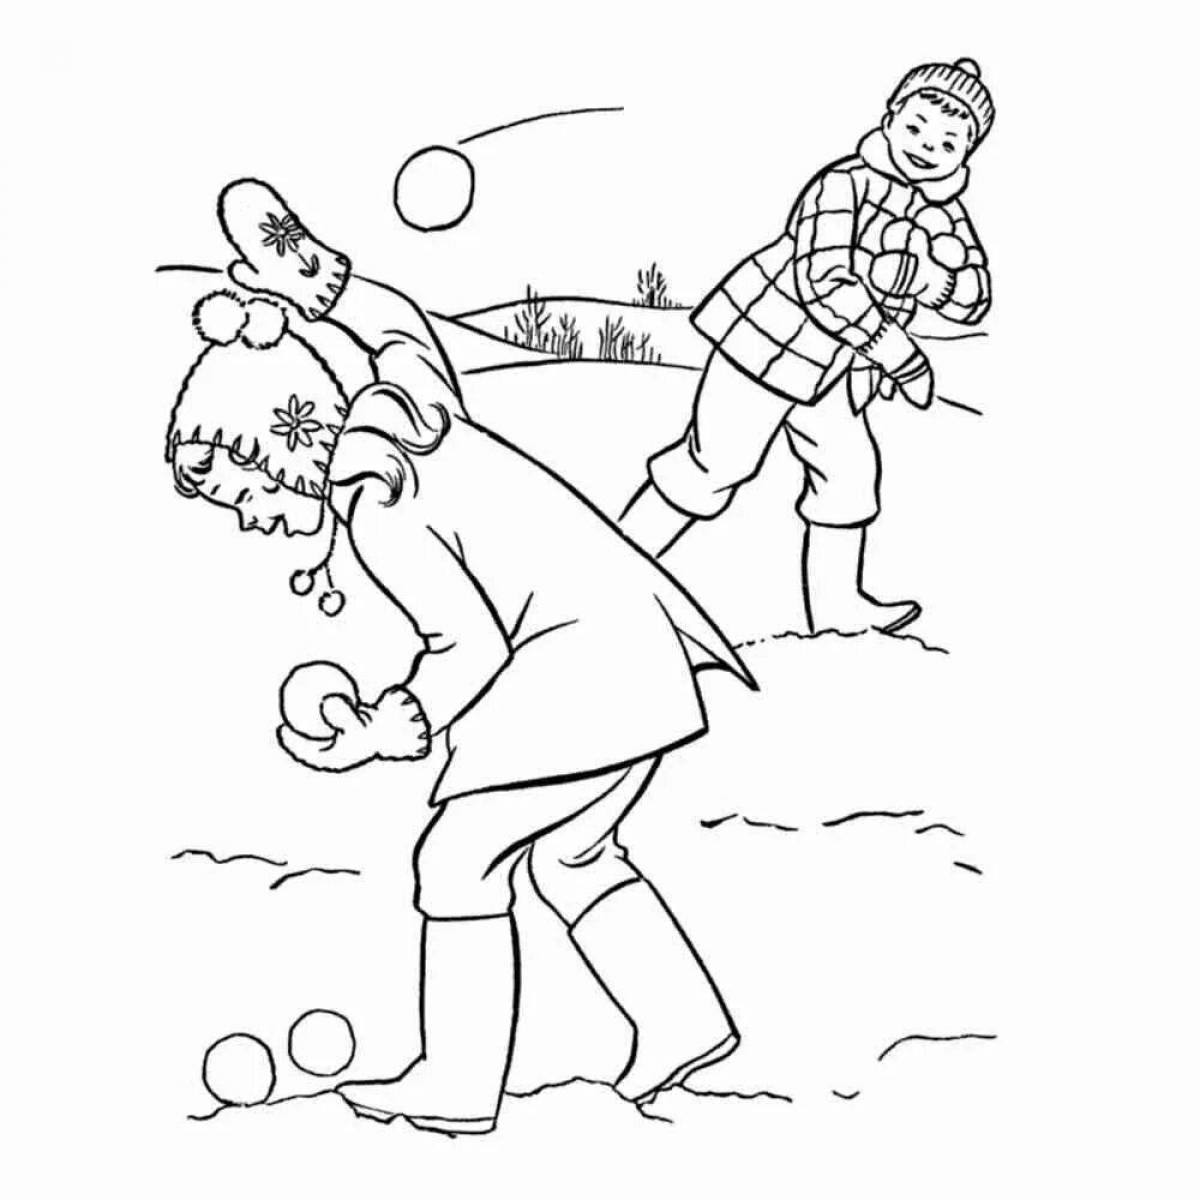 Stimulating snowball fight coloring book for kids